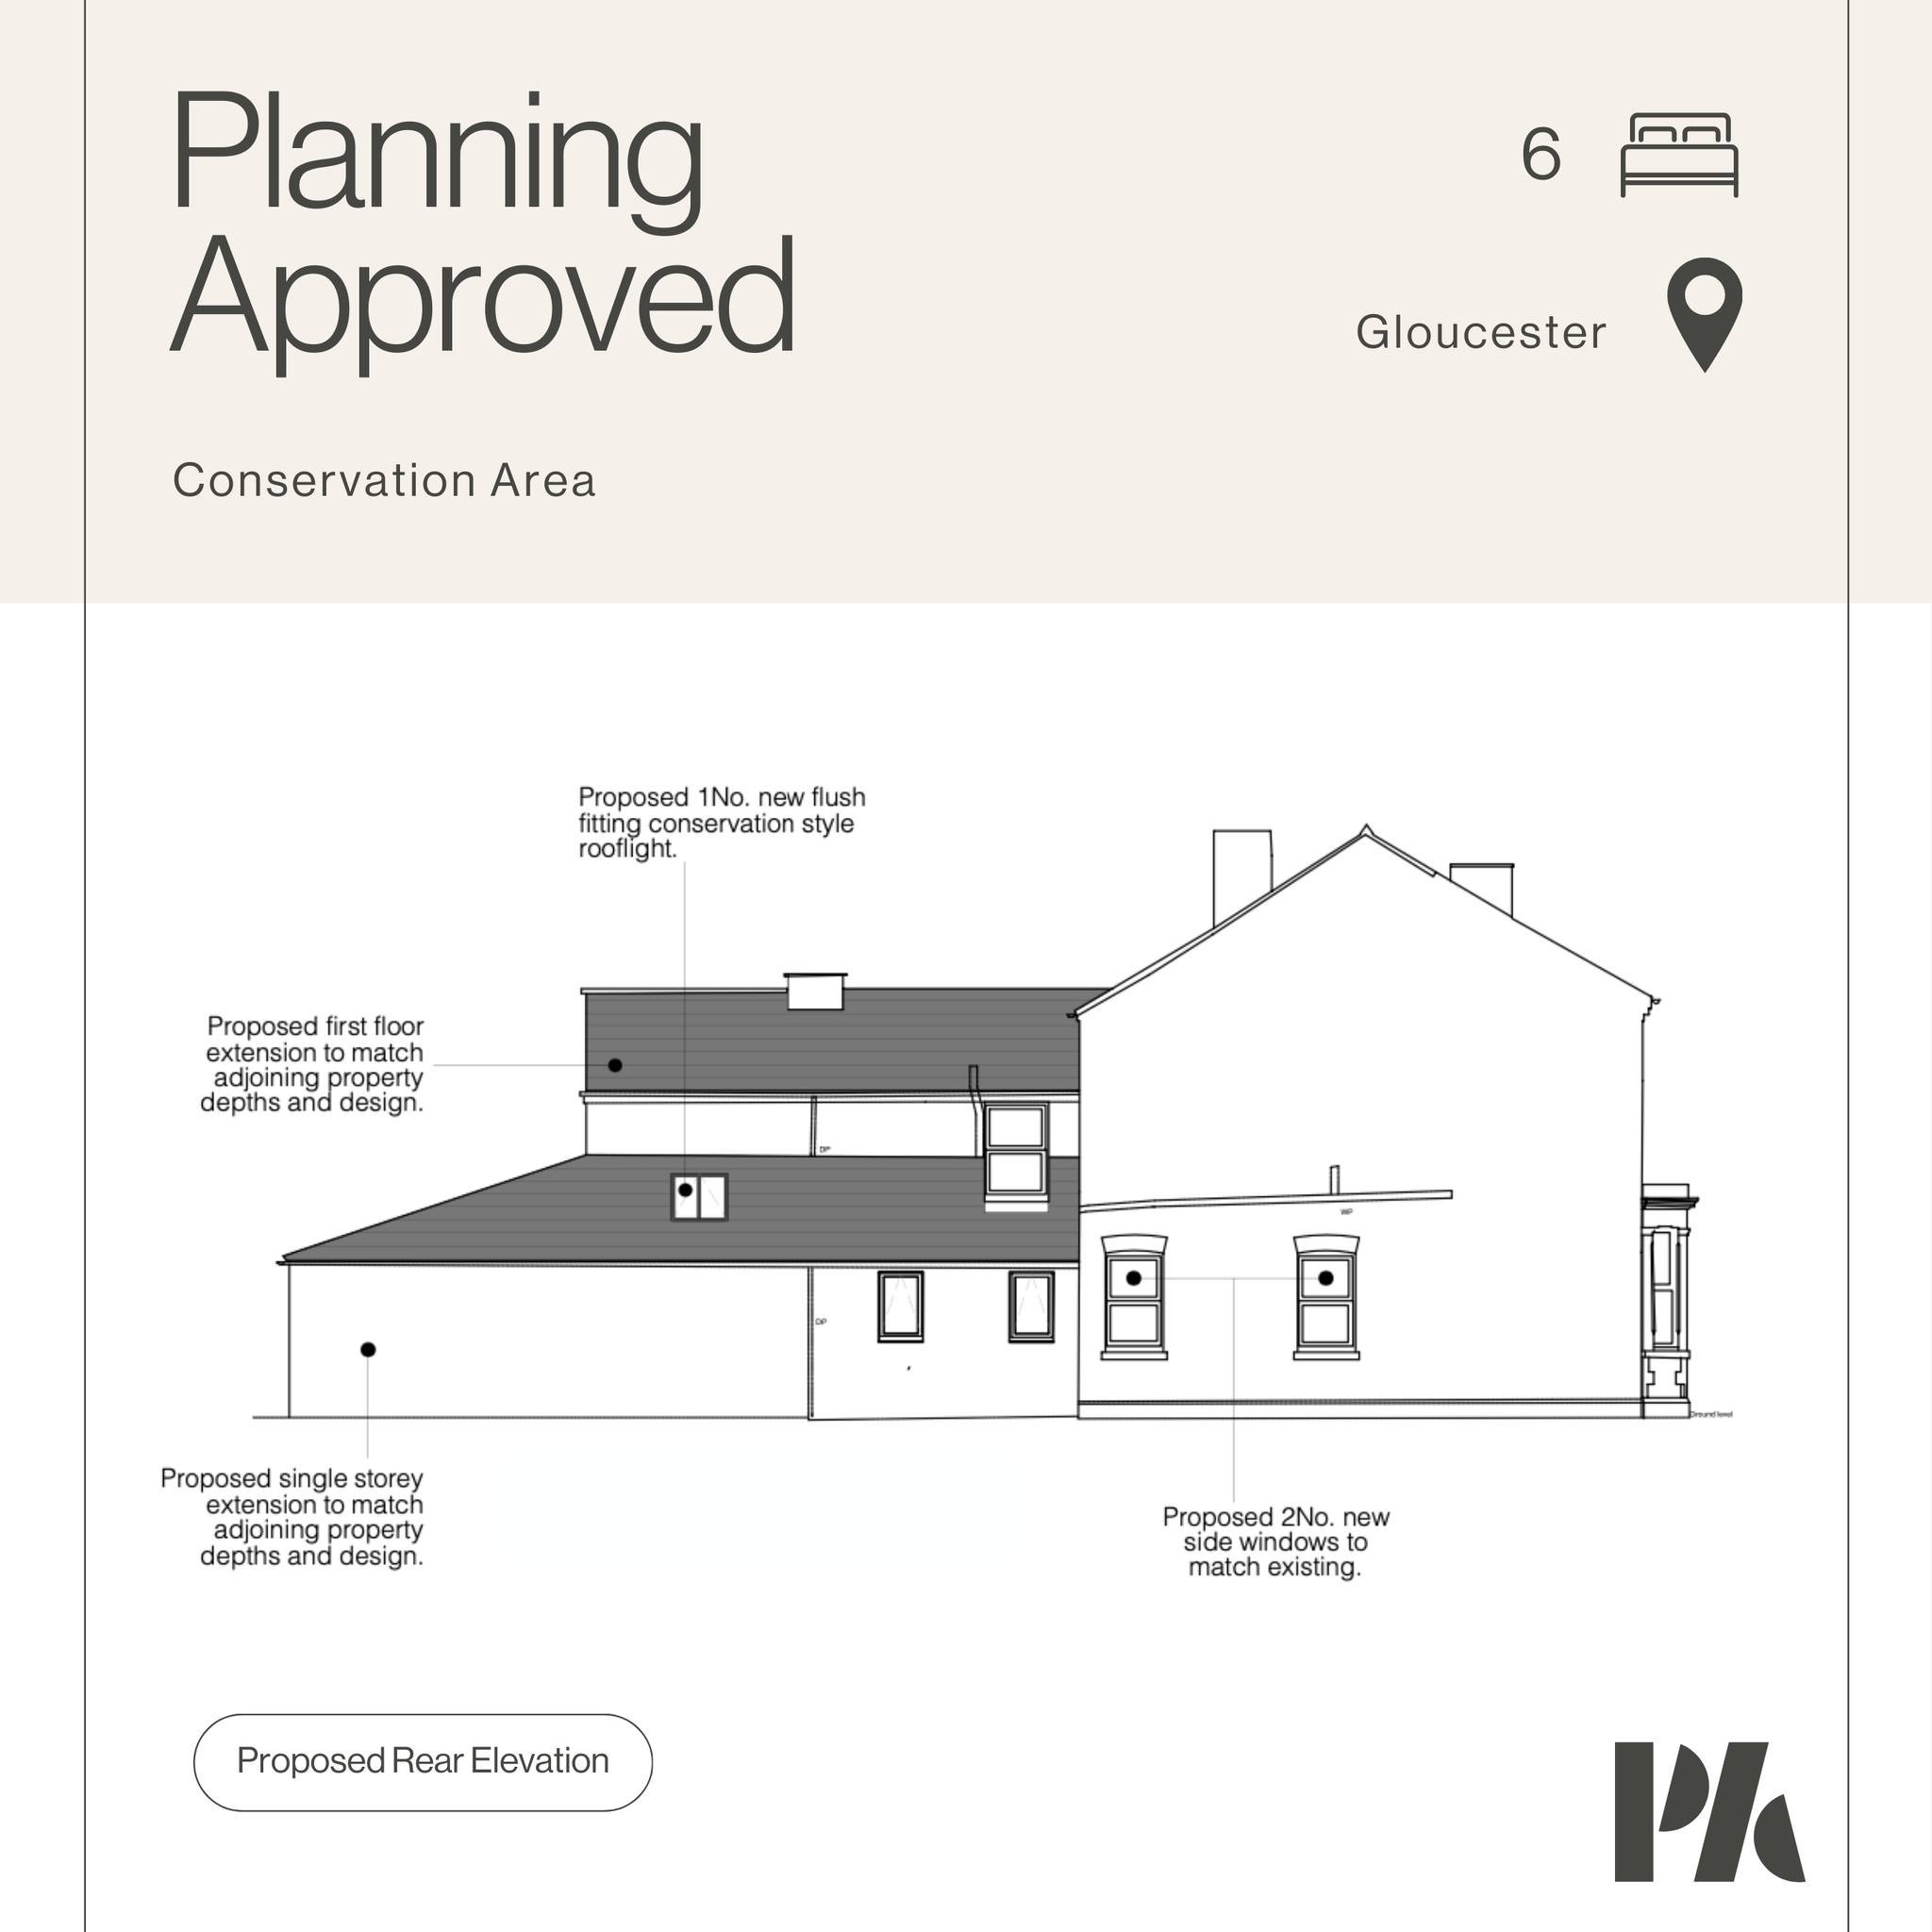 Planning approval in a CONSERVATION AREA 💥 

This project is a large rear wrap around ground floor extension AND a first floor outrigger extension to match the adjoining semi's first floor outrigger length. 

These extensions allow an existing 4 bed